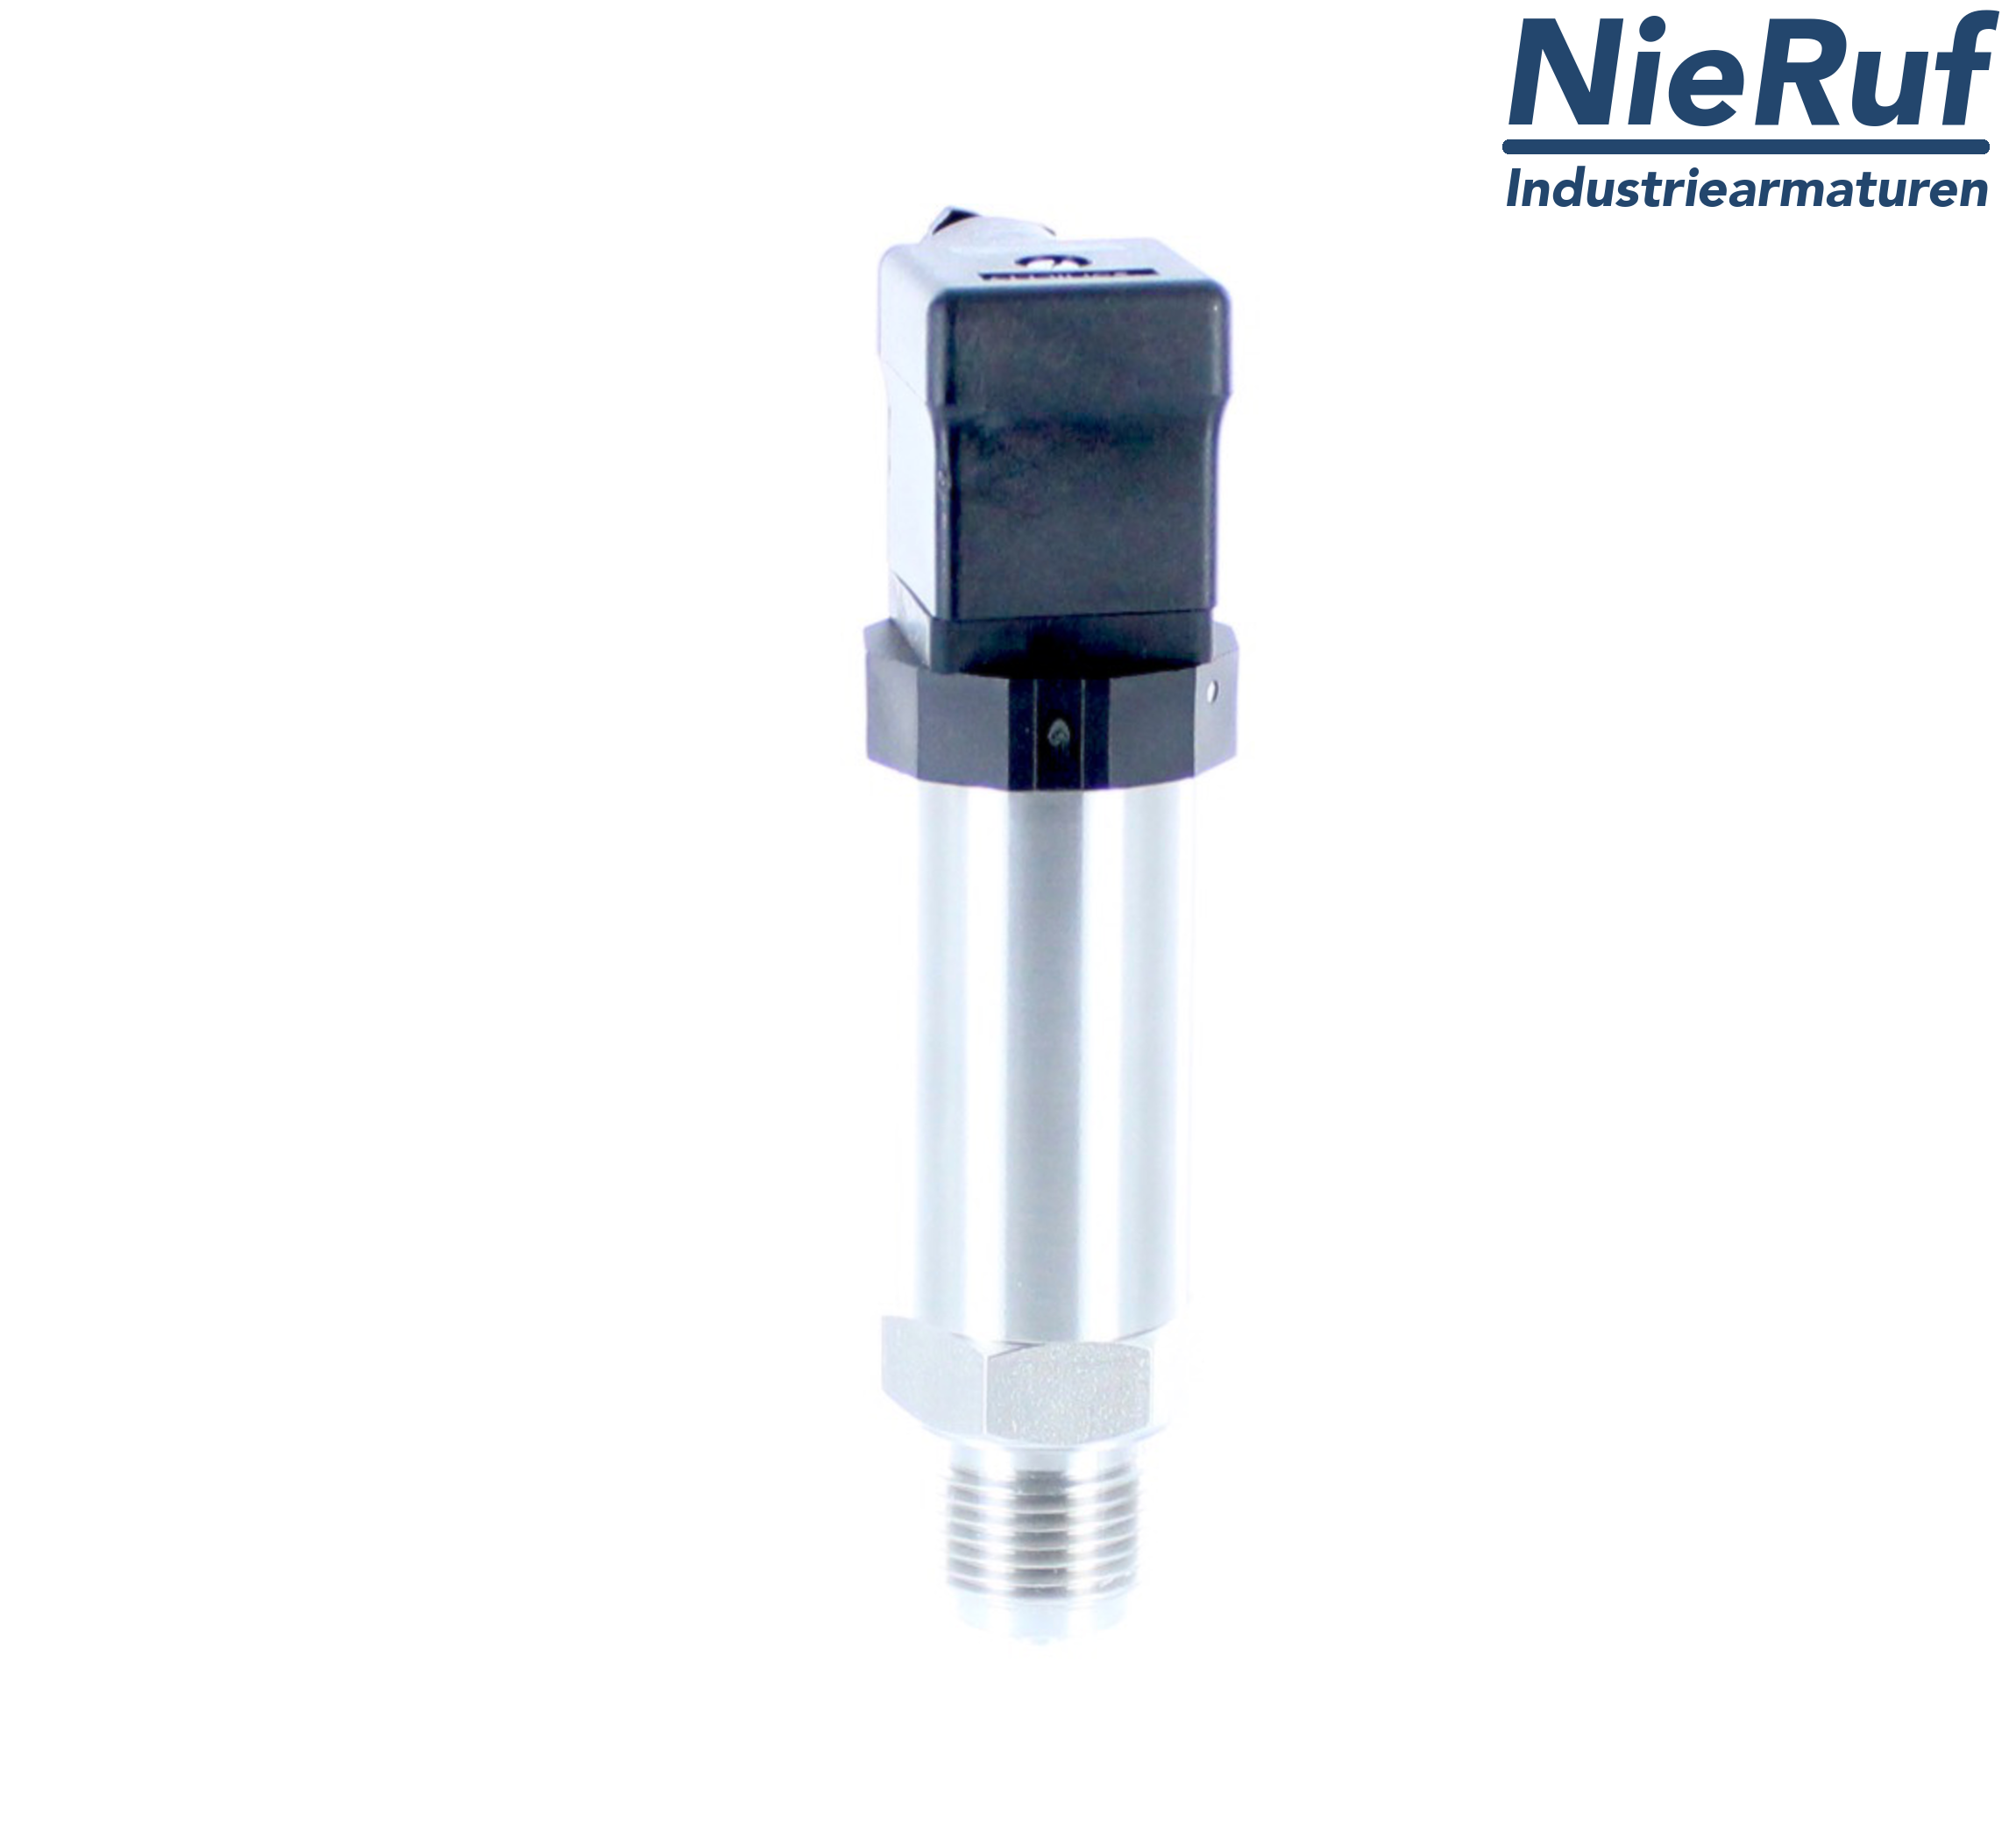 pressure sensor G 1/4" B DS01 stainless steel 2-wire: 4-20mA FPM 0,0 - 16,0 bar